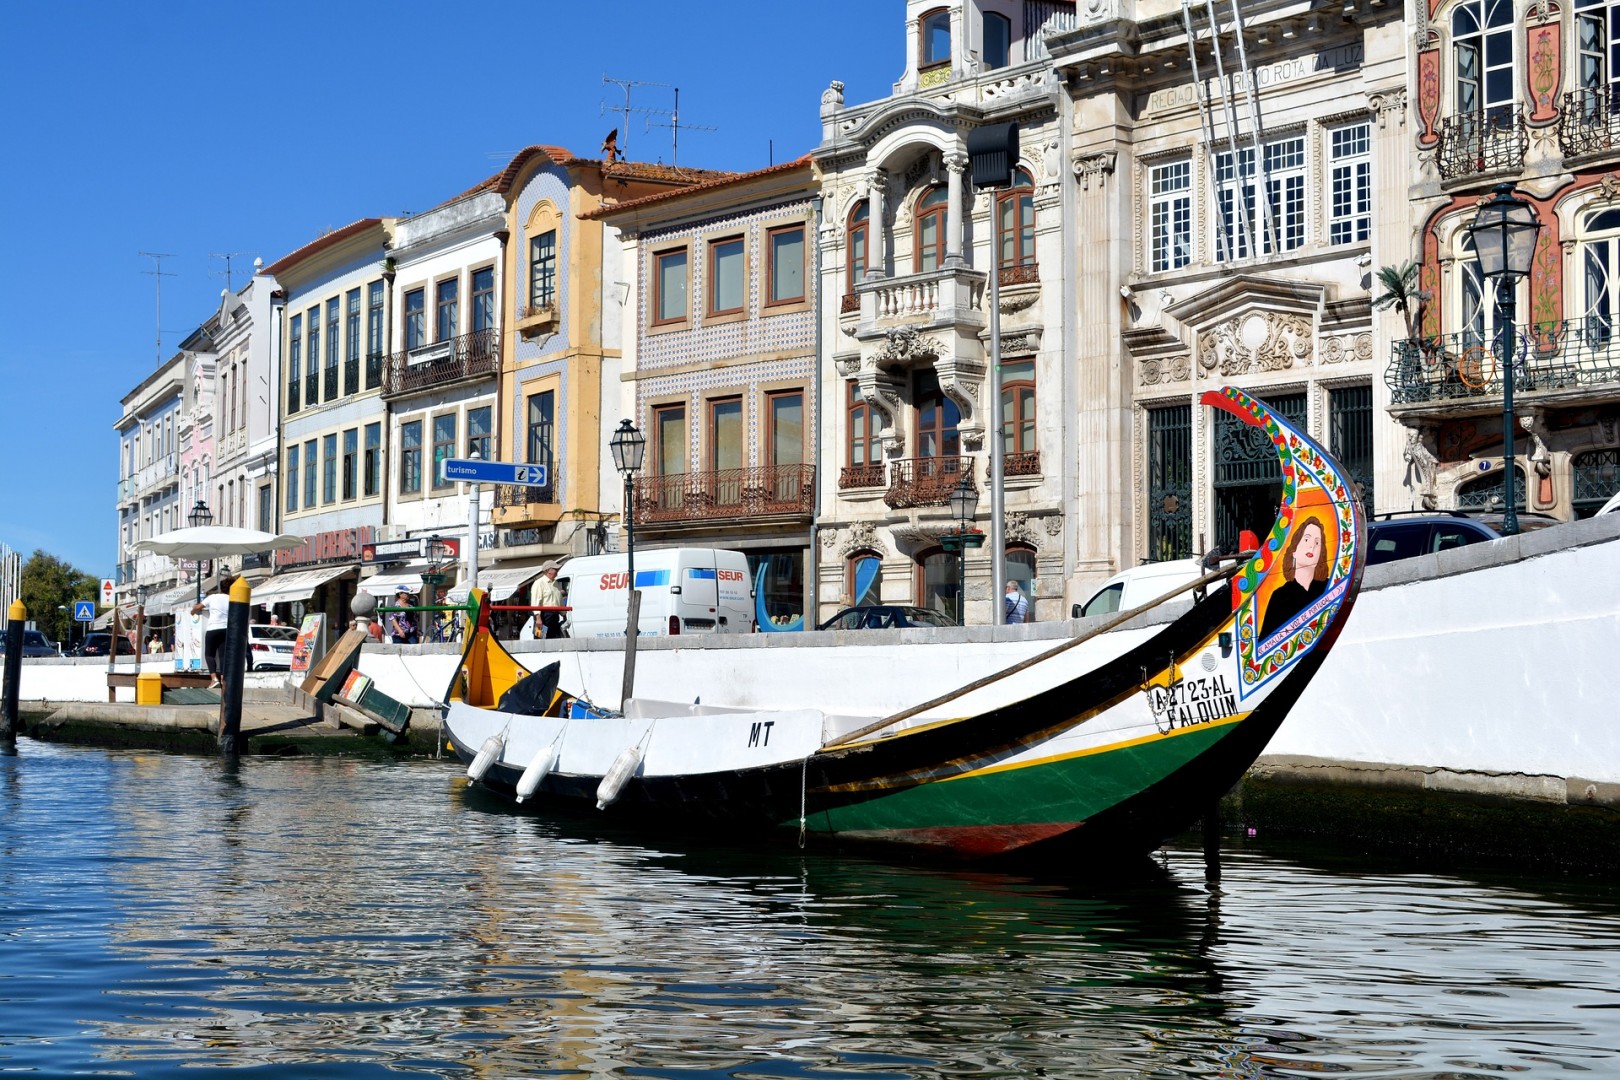 Portuguese For a Day Tours